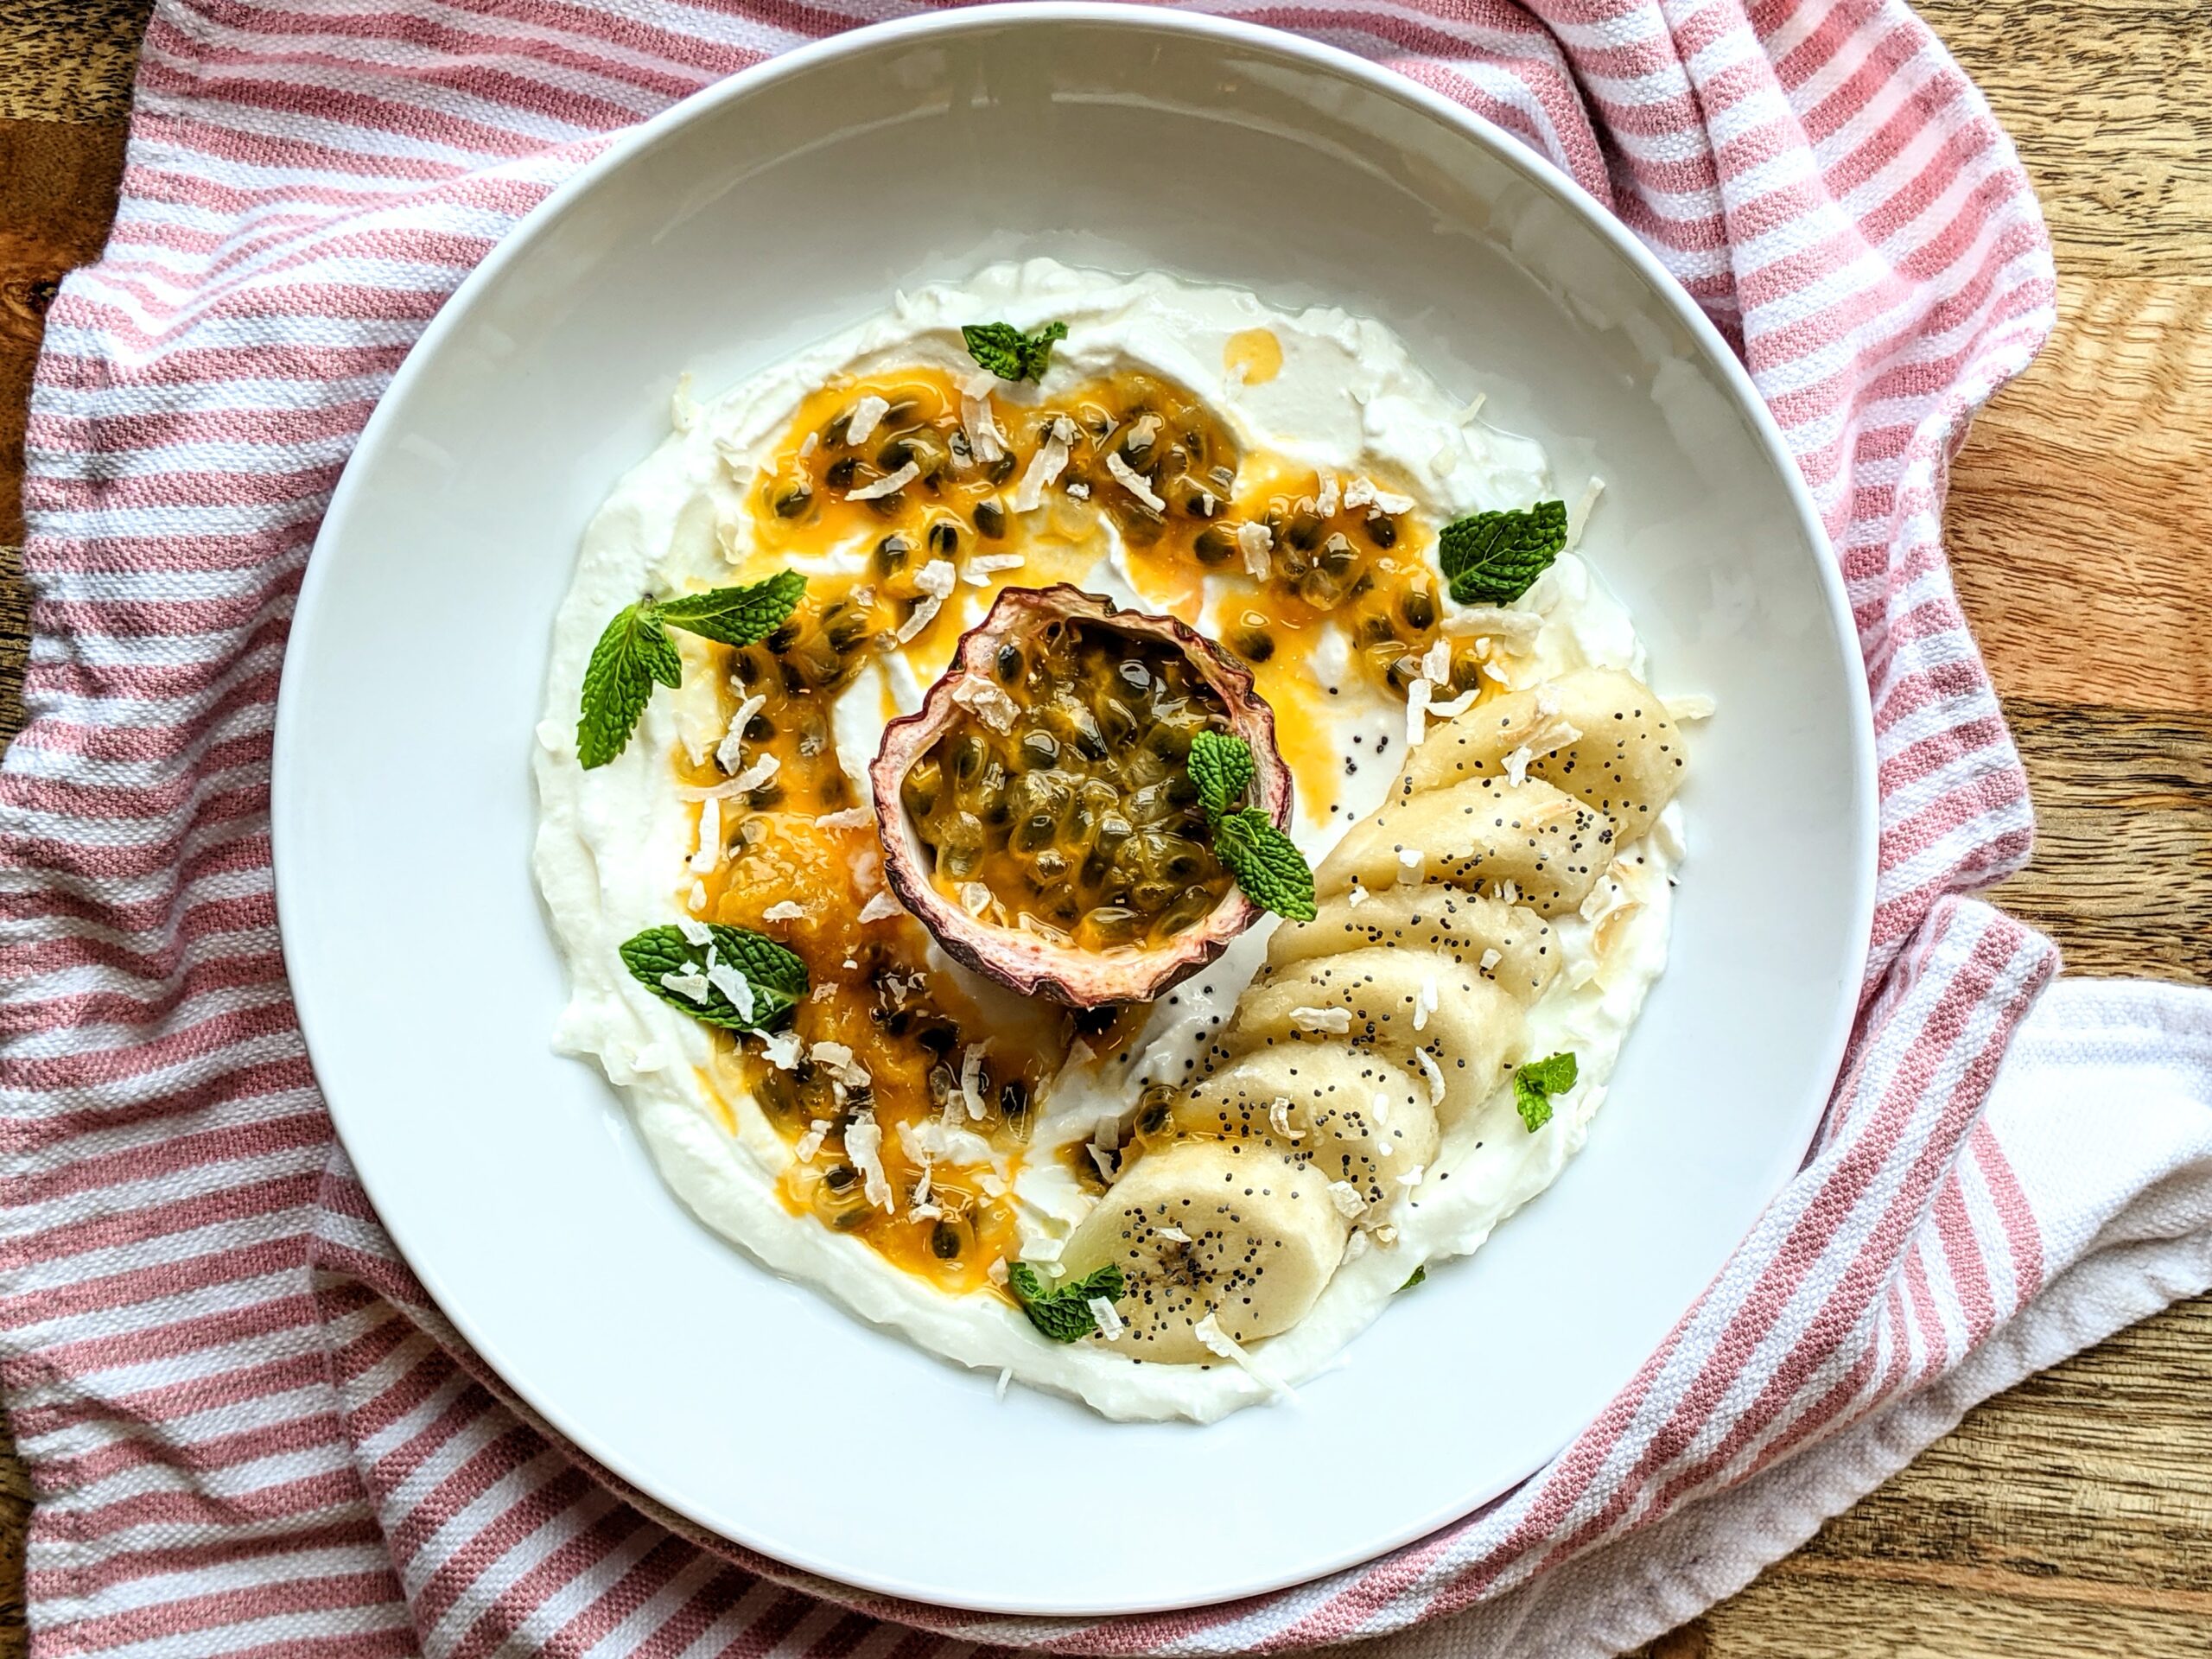 A hallow bowl of thick Greek yogurt topped with vibrant tangerine colored passionfruit pulp, sliced banana, half a pomegranate, chia seeds, and fresh mint leaves.